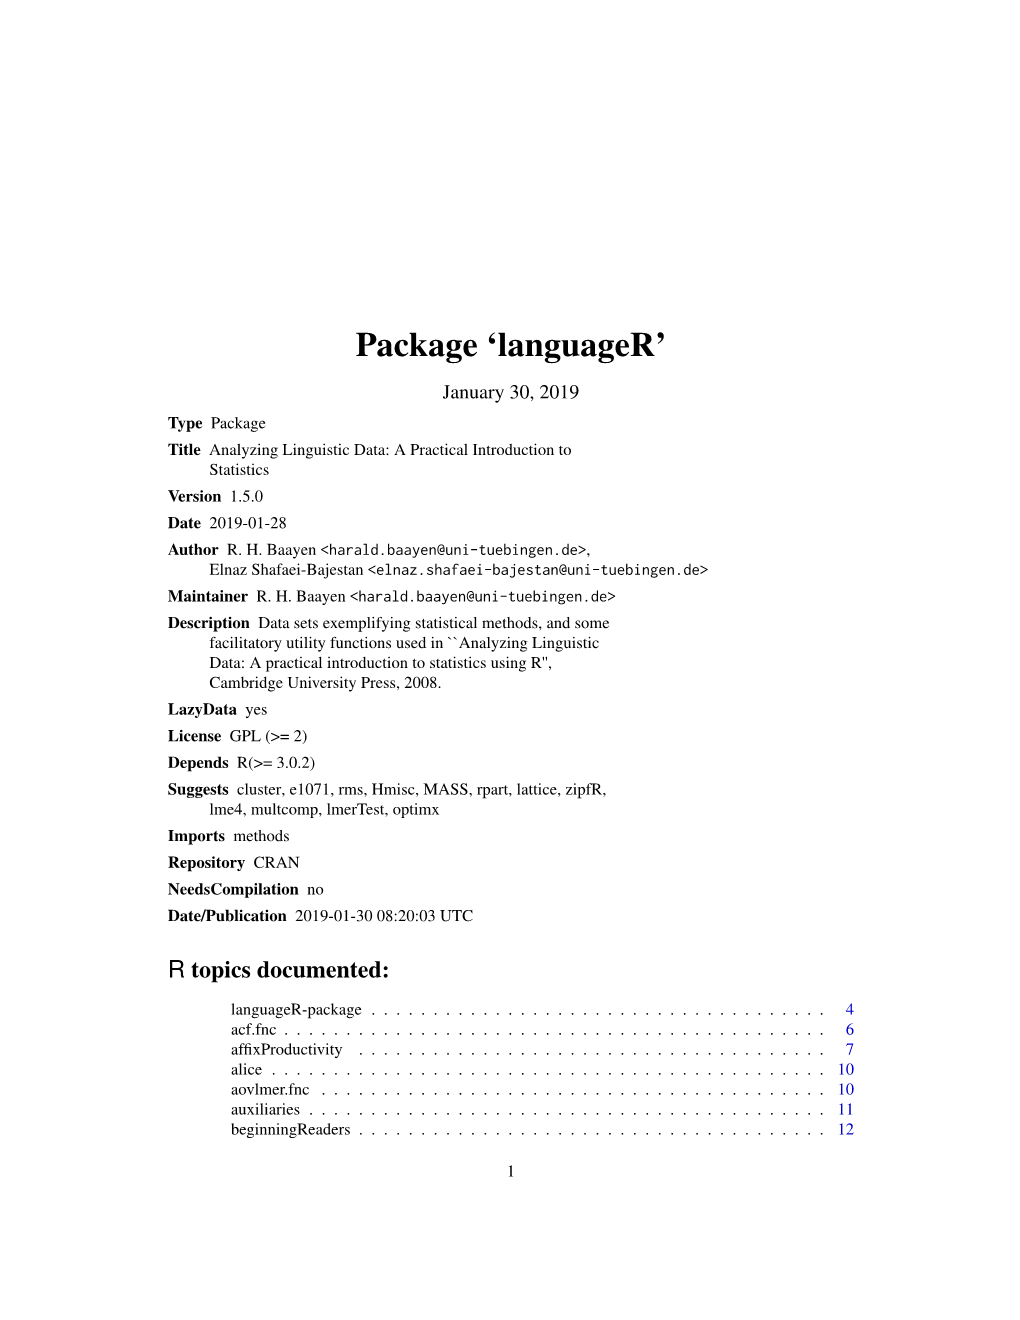 Package 'Languager'